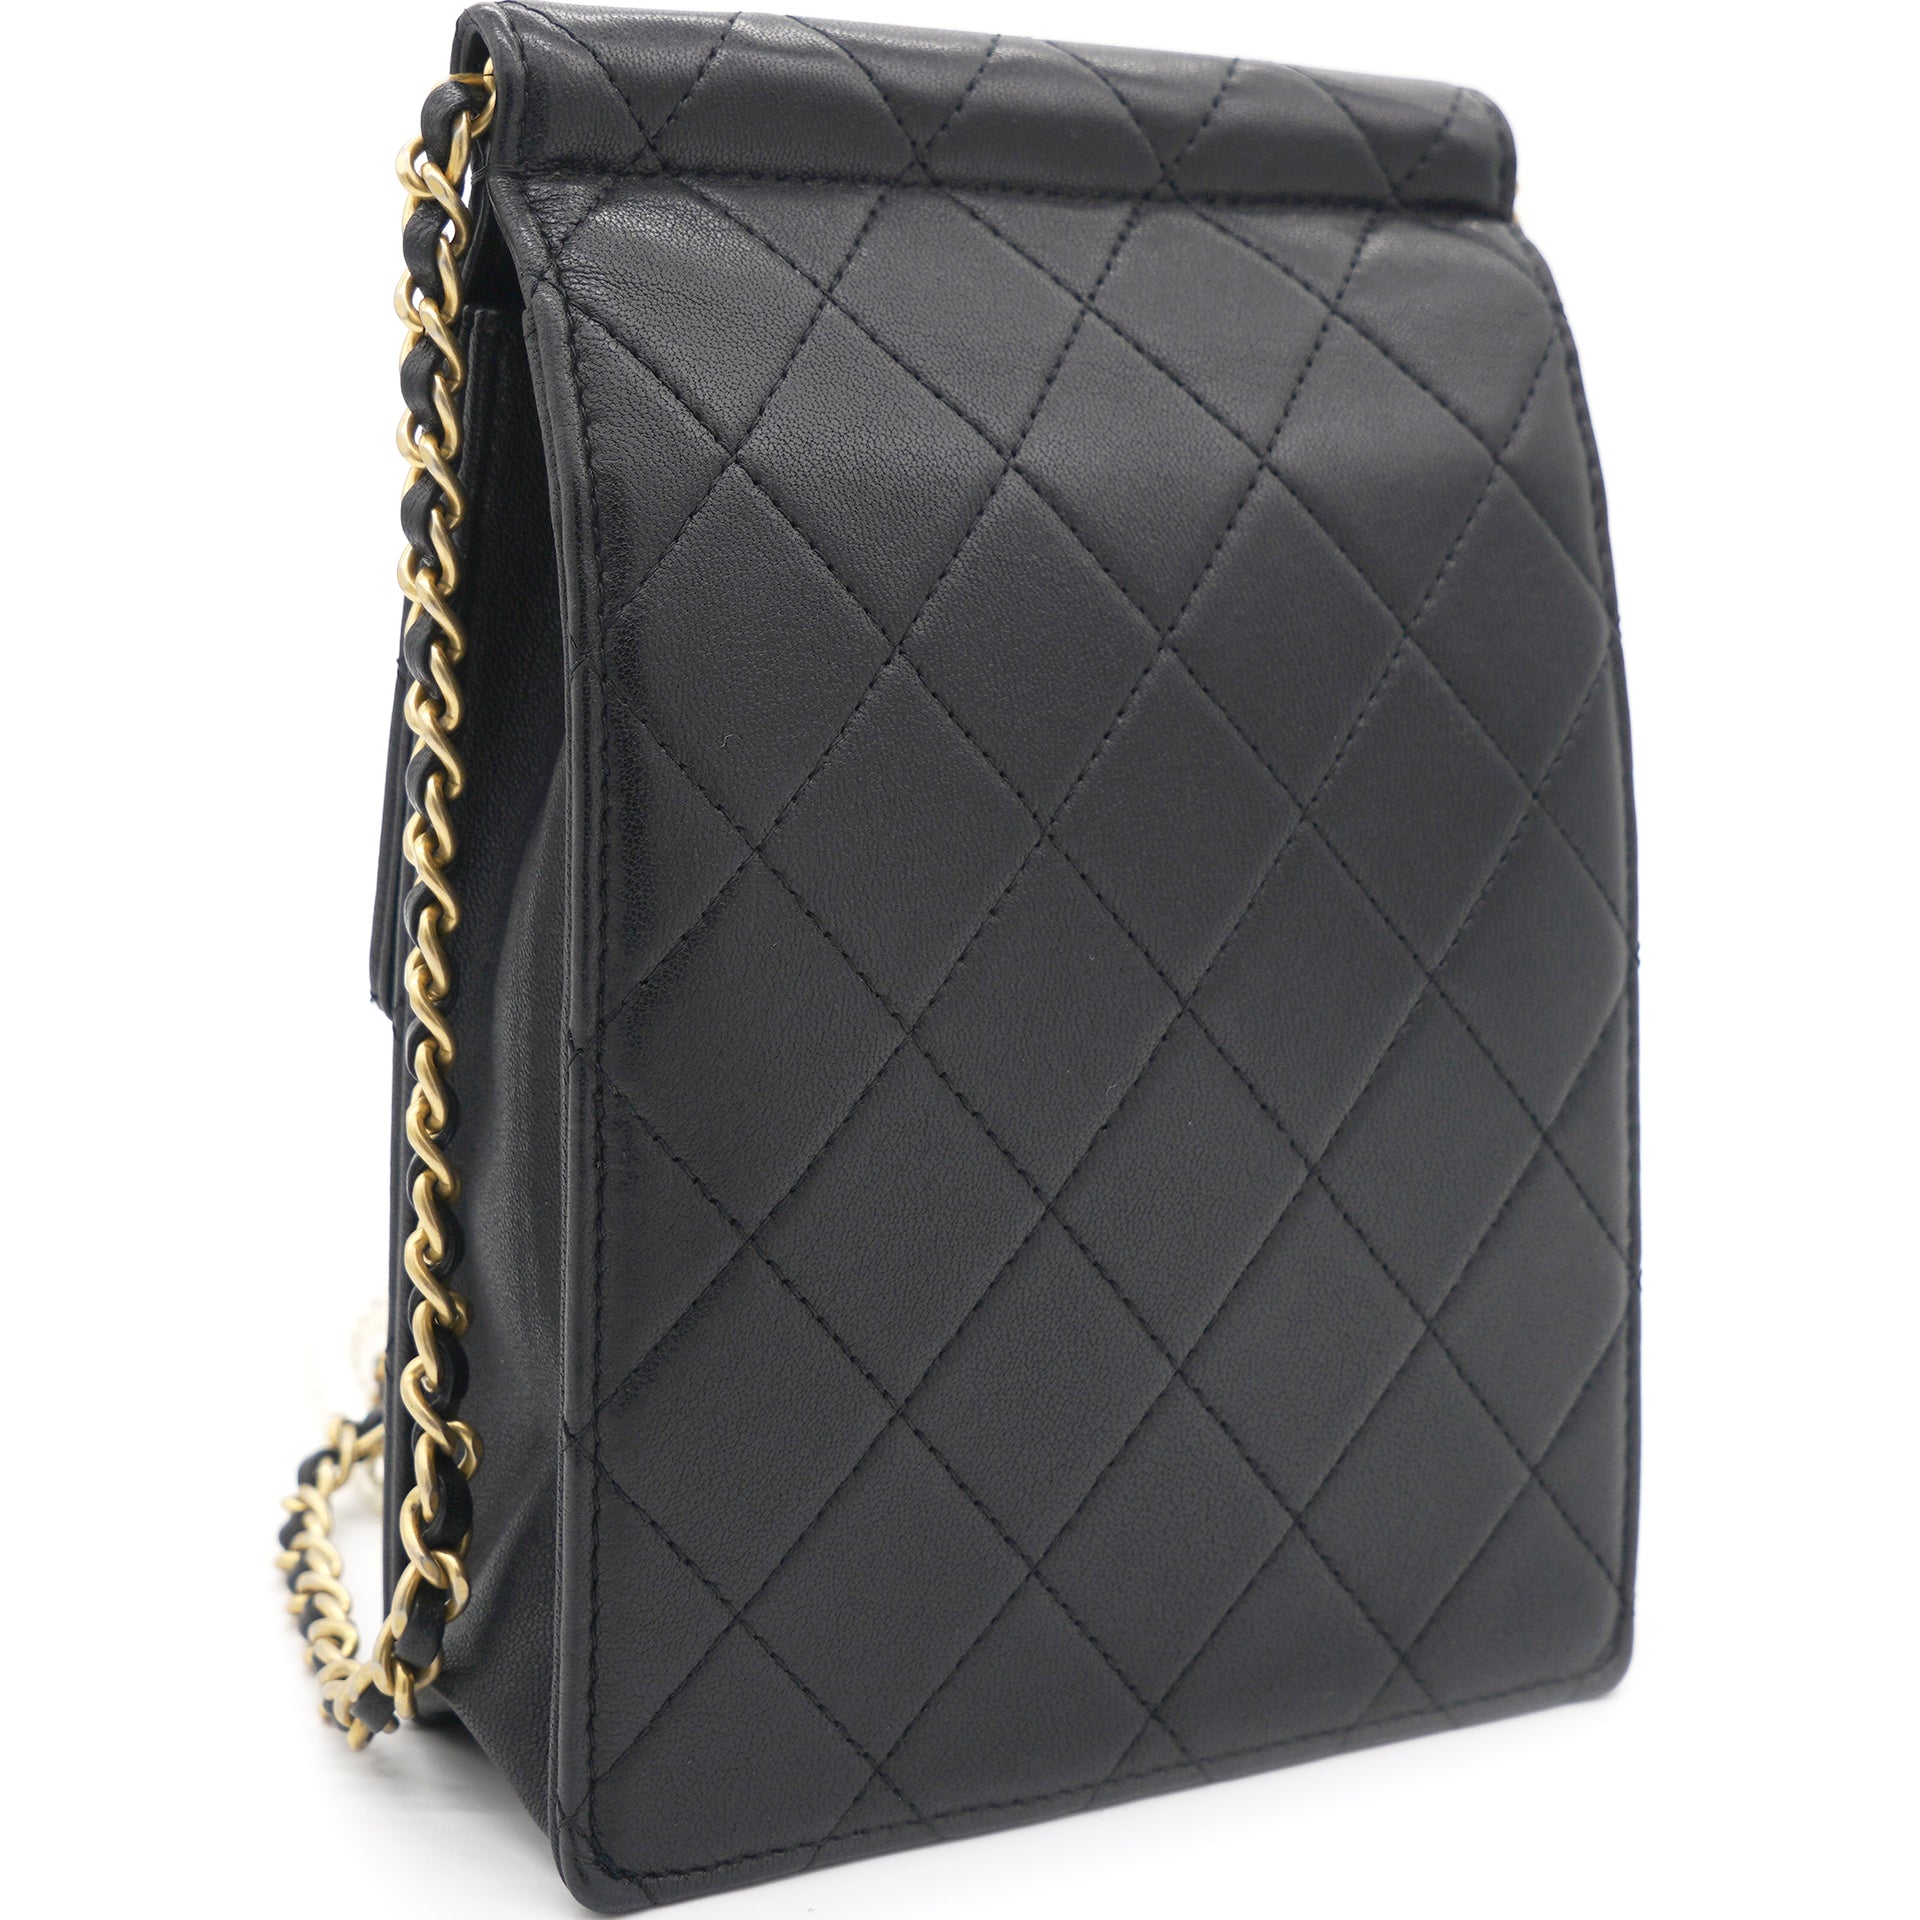 Chanel Vertical Pearls Clutch with Chic Pearl Chain In Black and